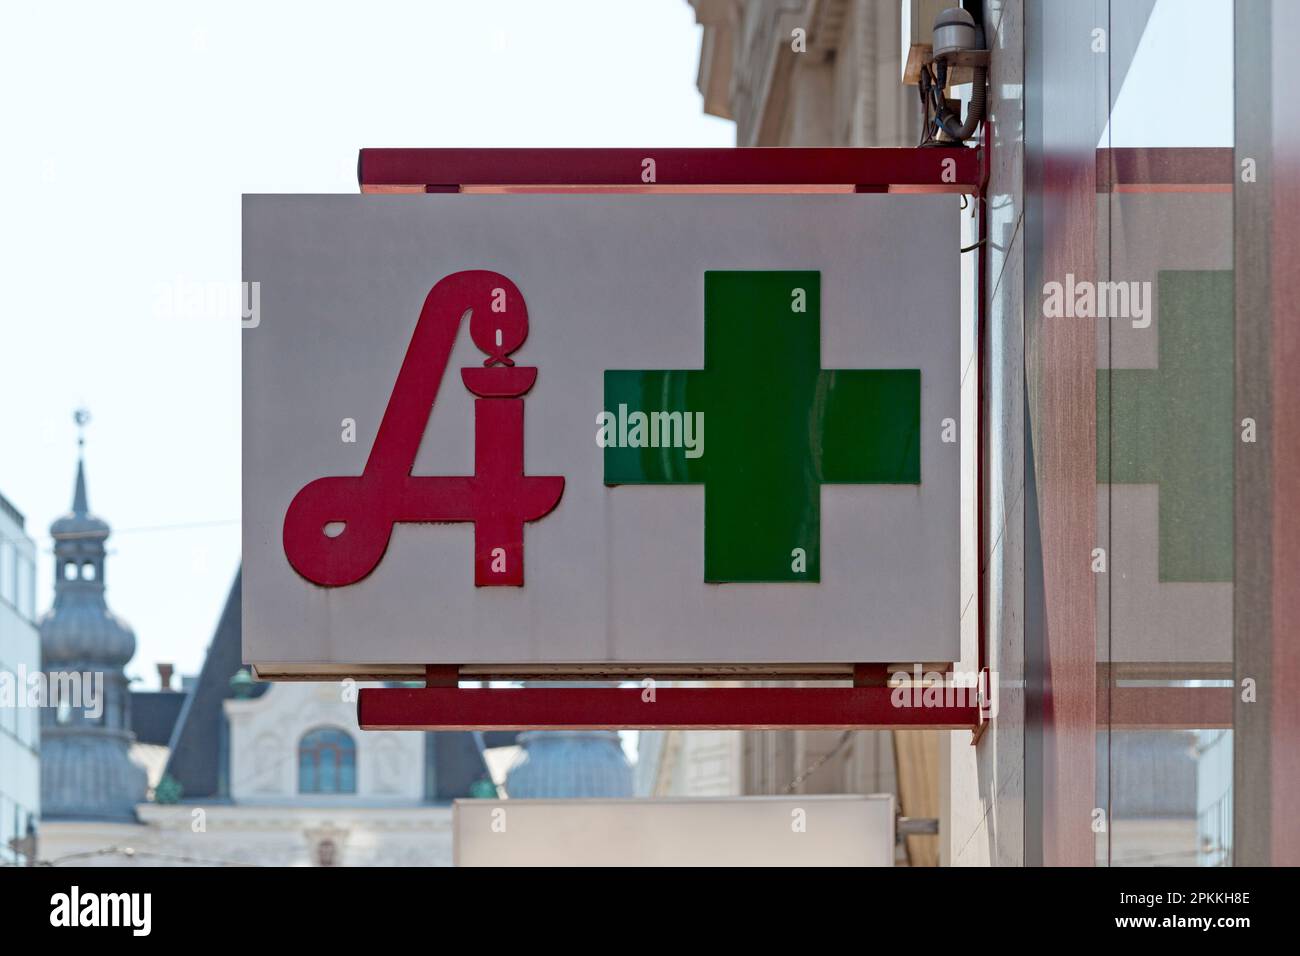 Austrian pharmacy displaying the traditional pharmacy sign used in the country next to the standard green cross. Stock Photo